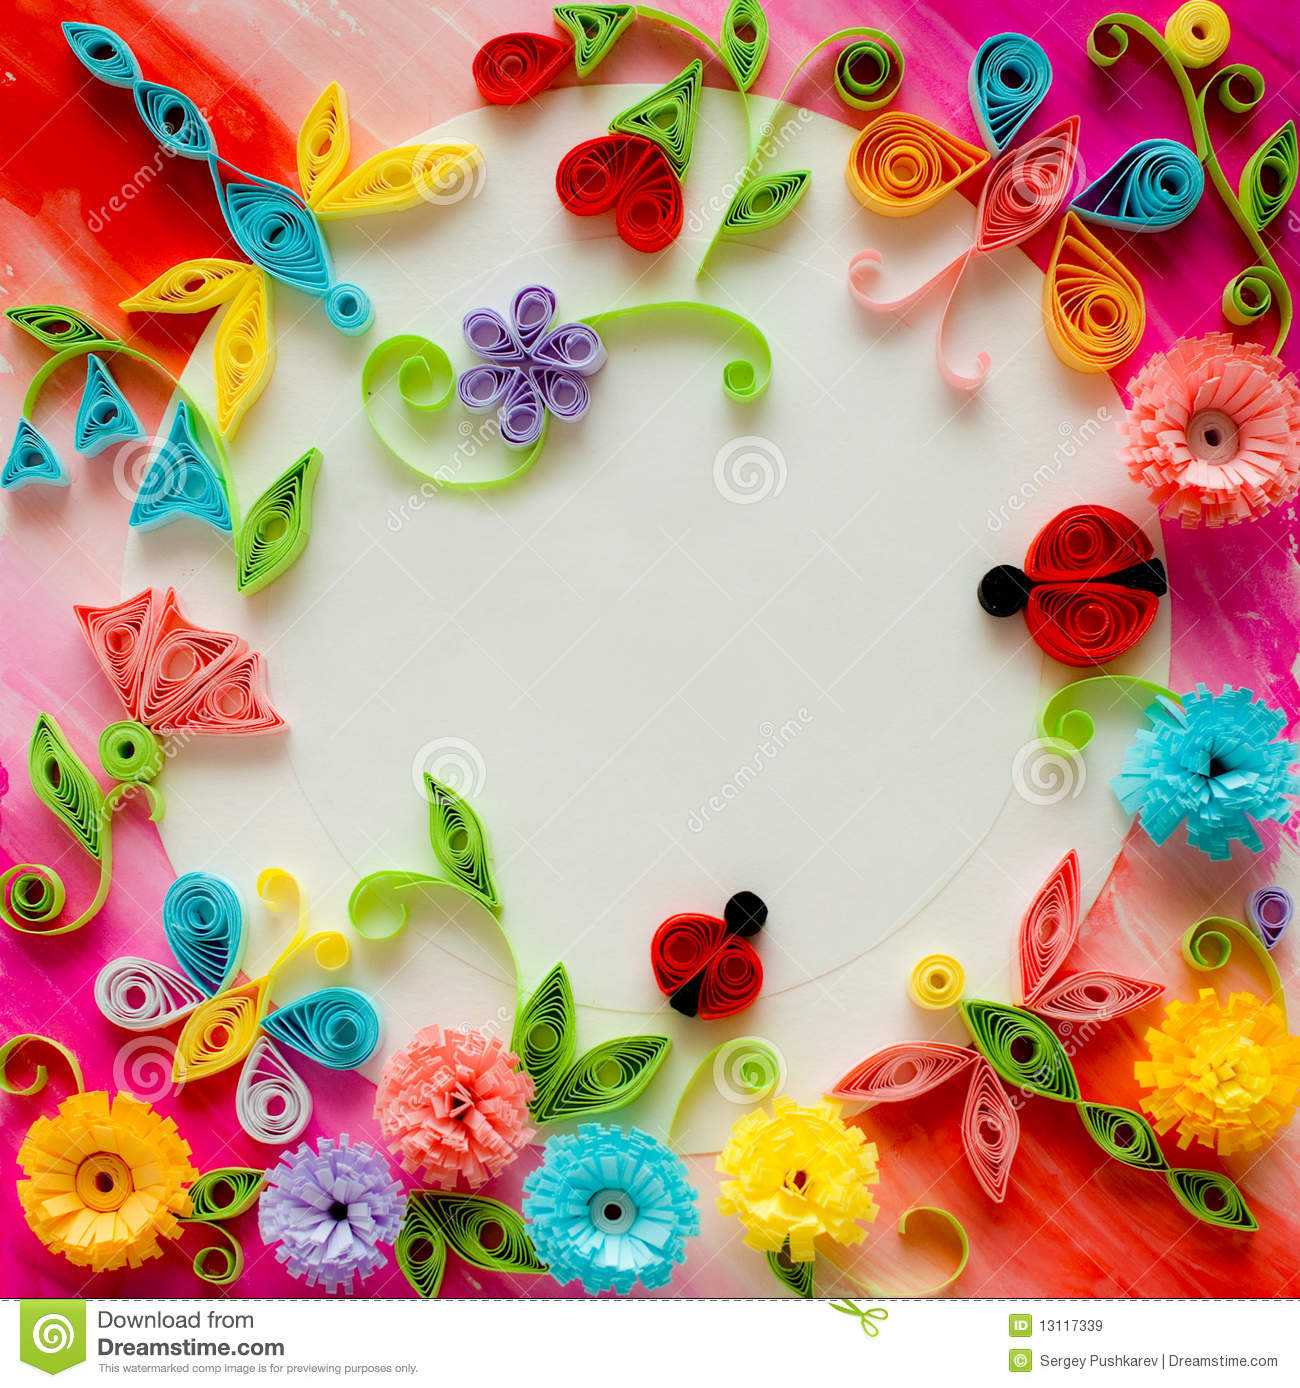 Quilling Greeting Card Blank Template Stock Image – Image Of With Regard To Free Printable Blank Greeting Card Templates